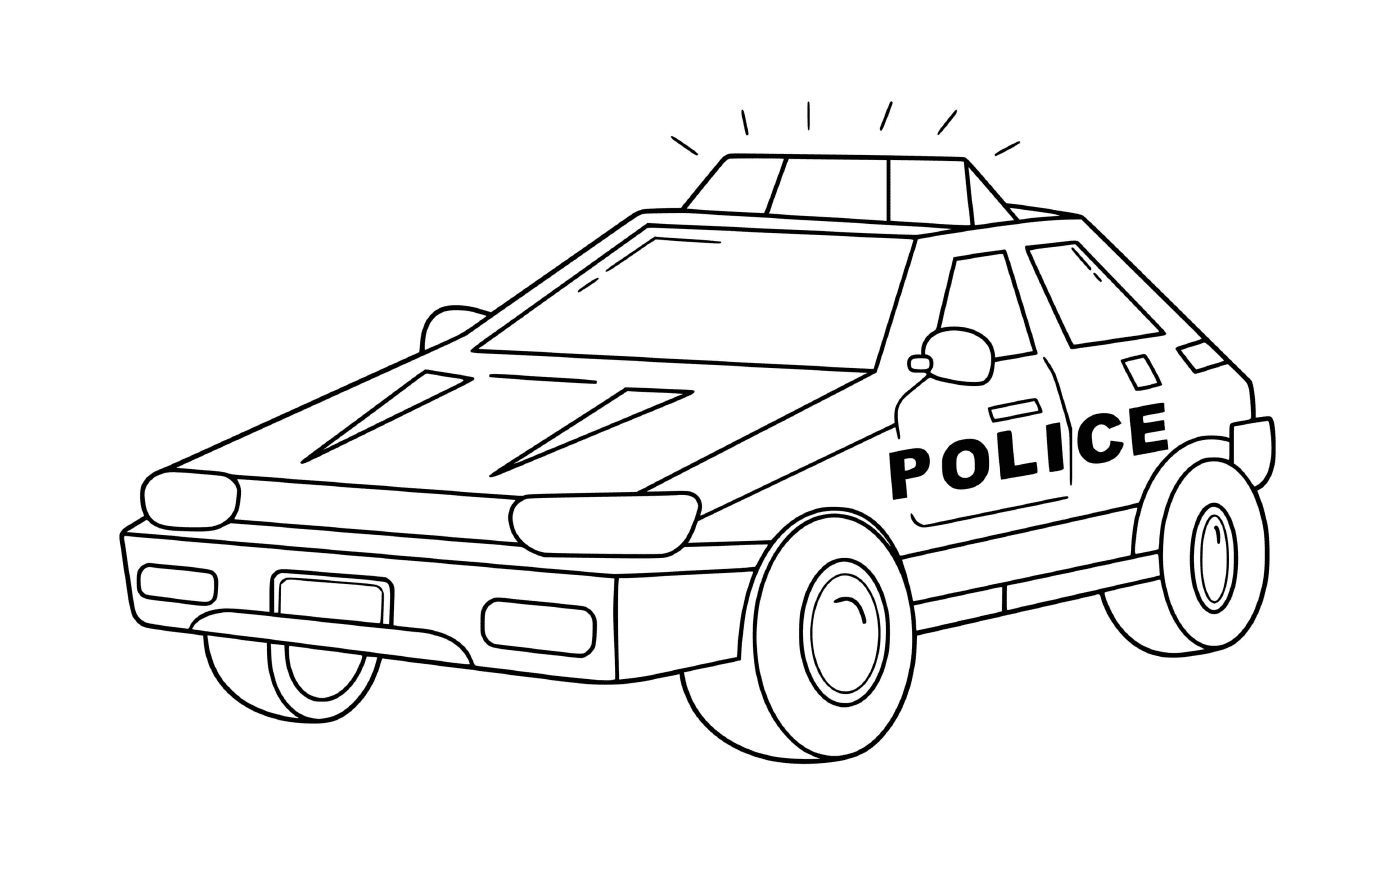  Transport square-style police car 